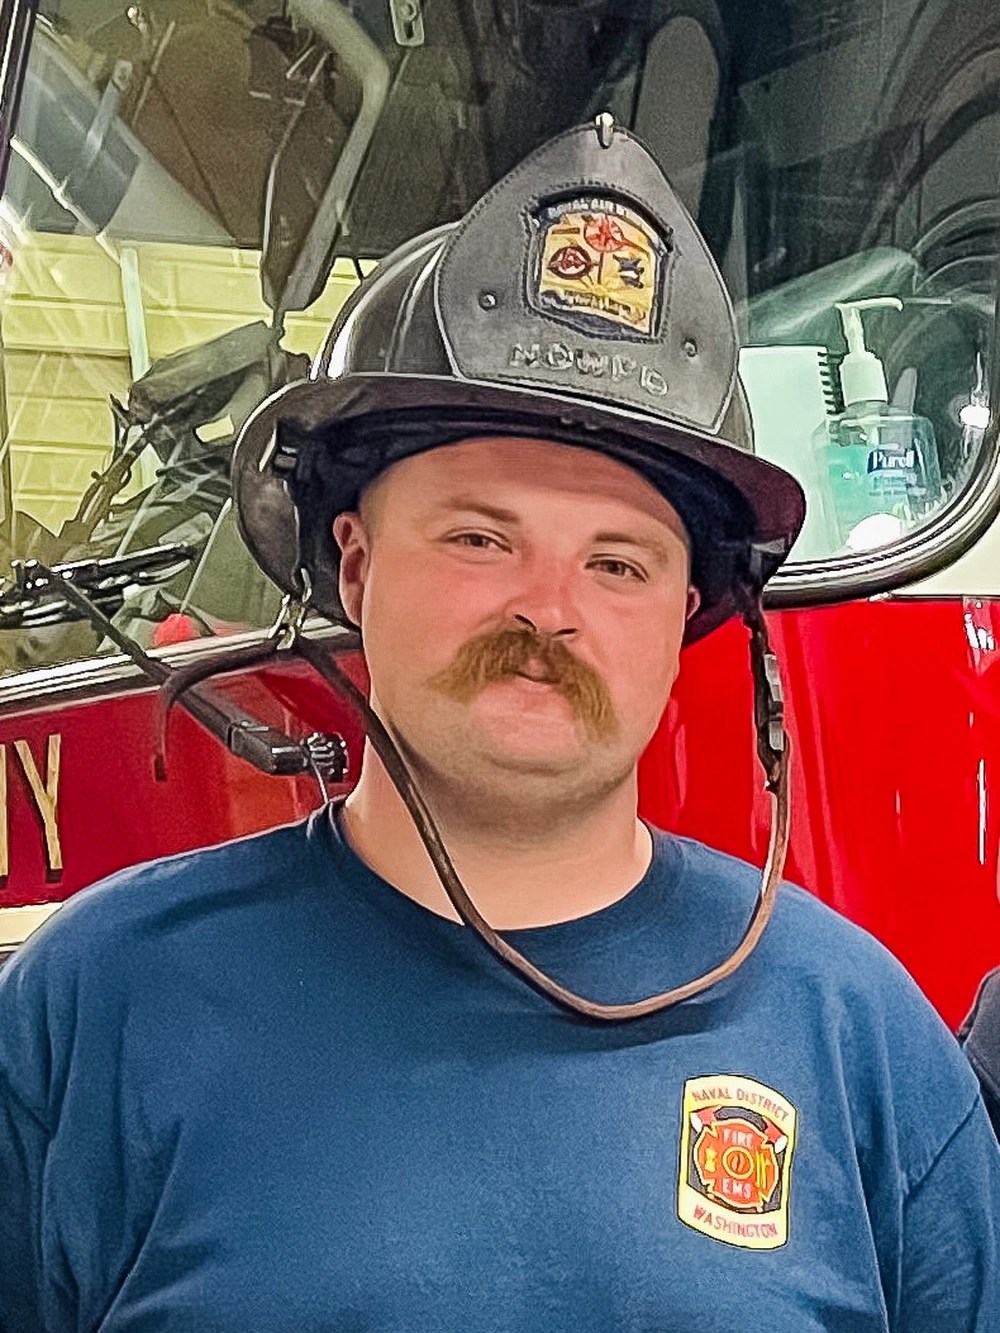 DVIDS News NAS Patuxent River Mourns Loss of Firefighter Brice C